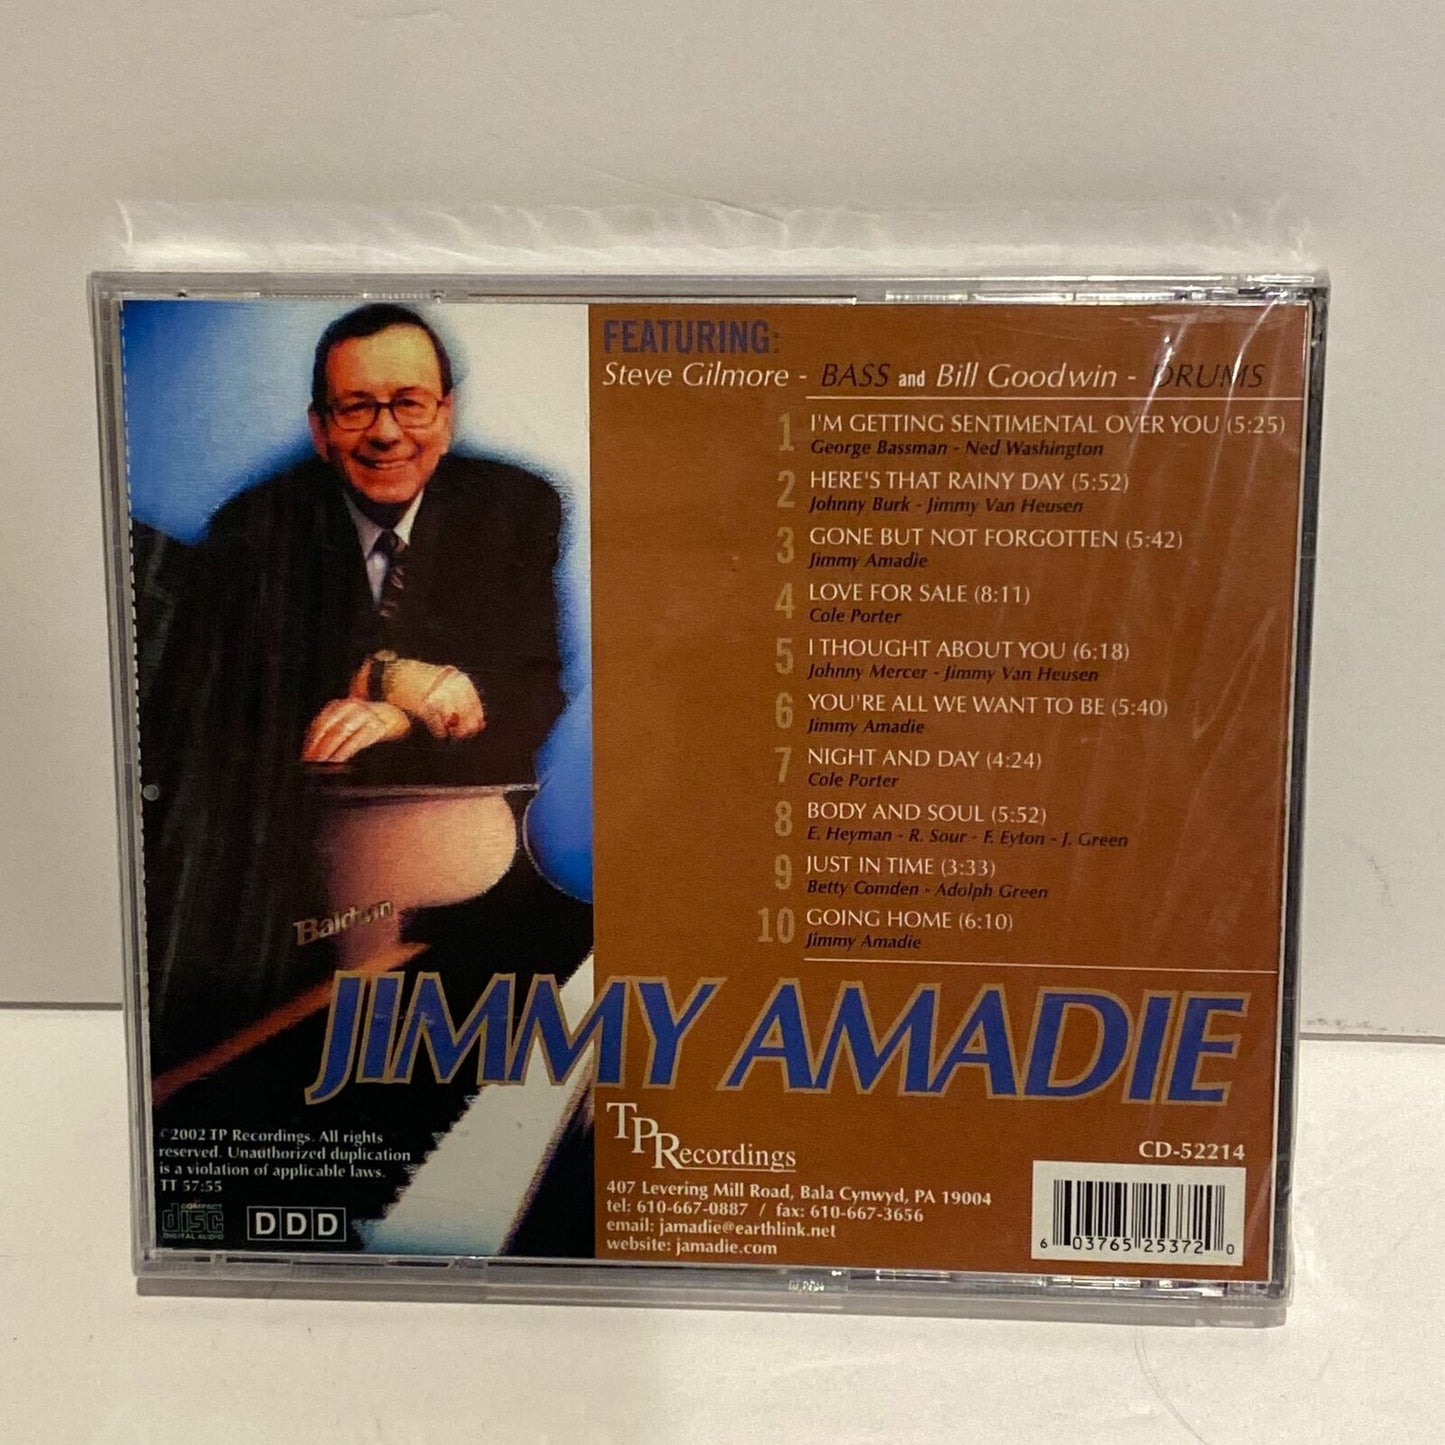 A Salute To Sinatra In A Trio Setting Music Compact Disk By Jimmy Amadie 2007